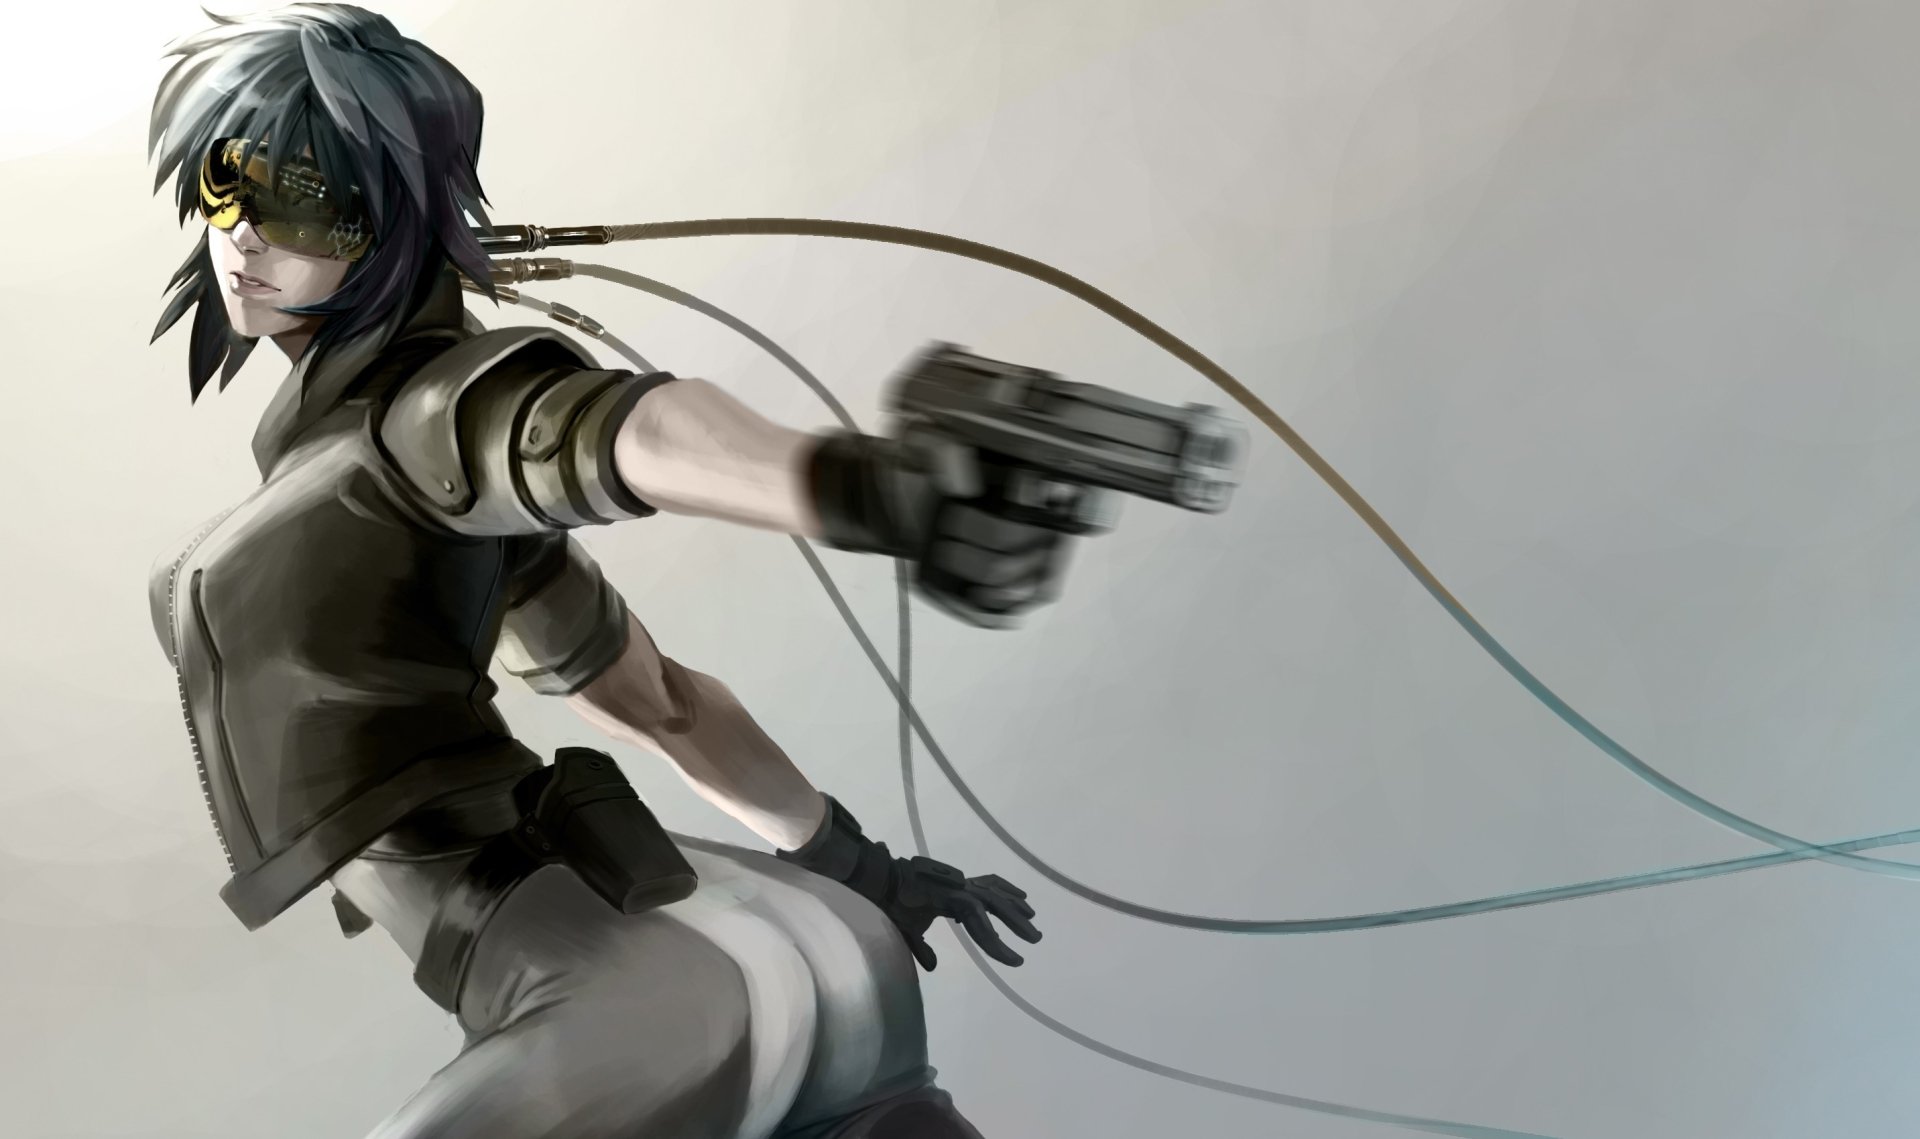 ghost in the shell wallpaper hd,anime,cg artwork,illustration,black hair,fictional character